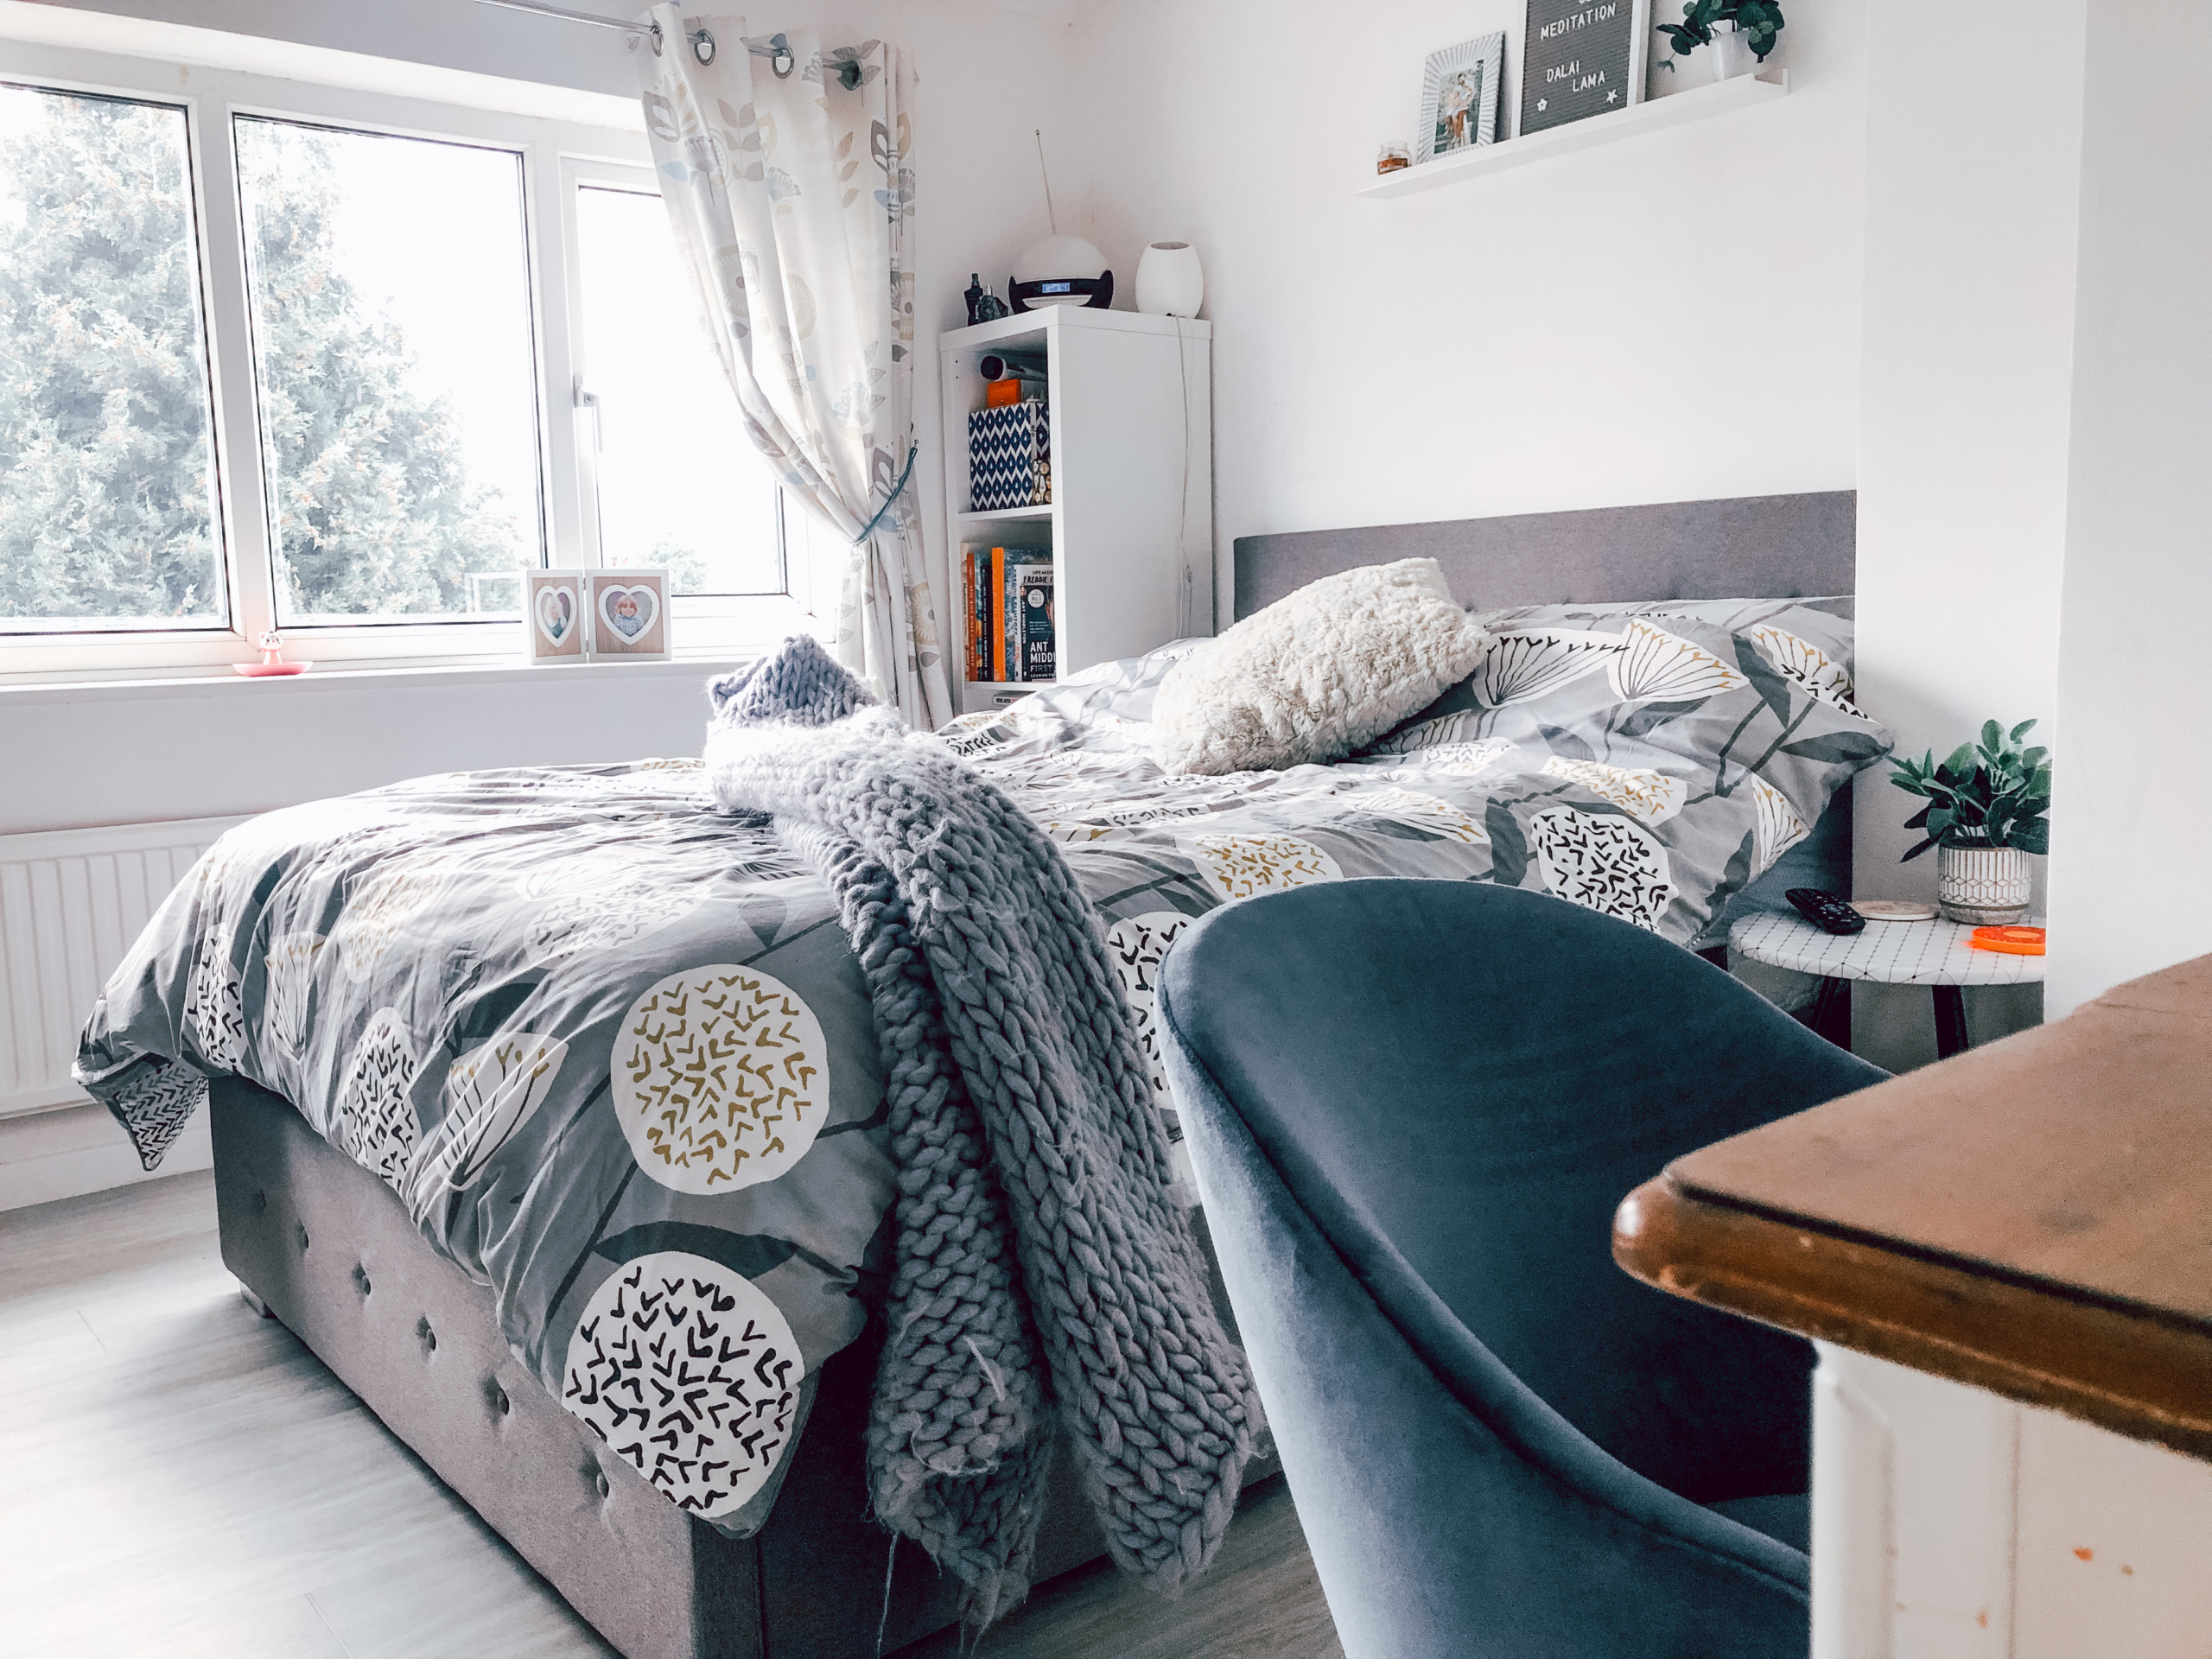 4 Ways to spruce up your bedroom